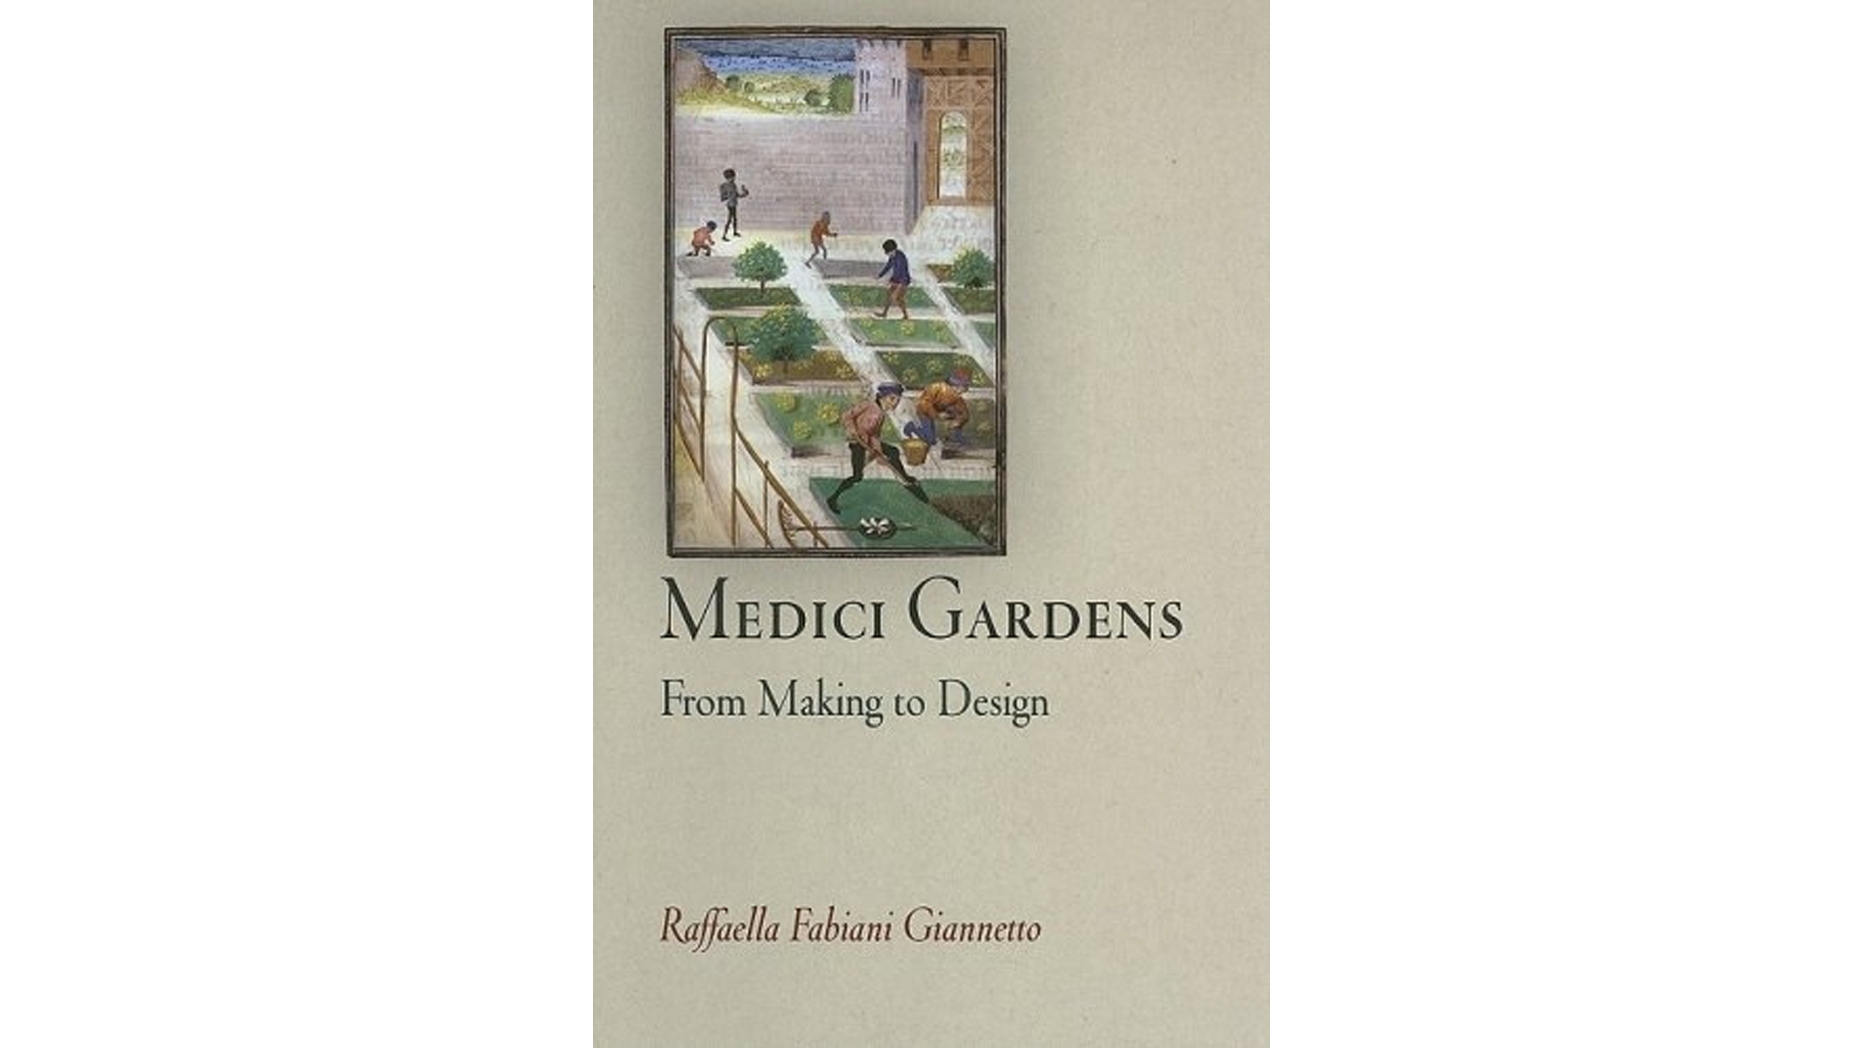 Medici Gardens: From Making to Design book cover